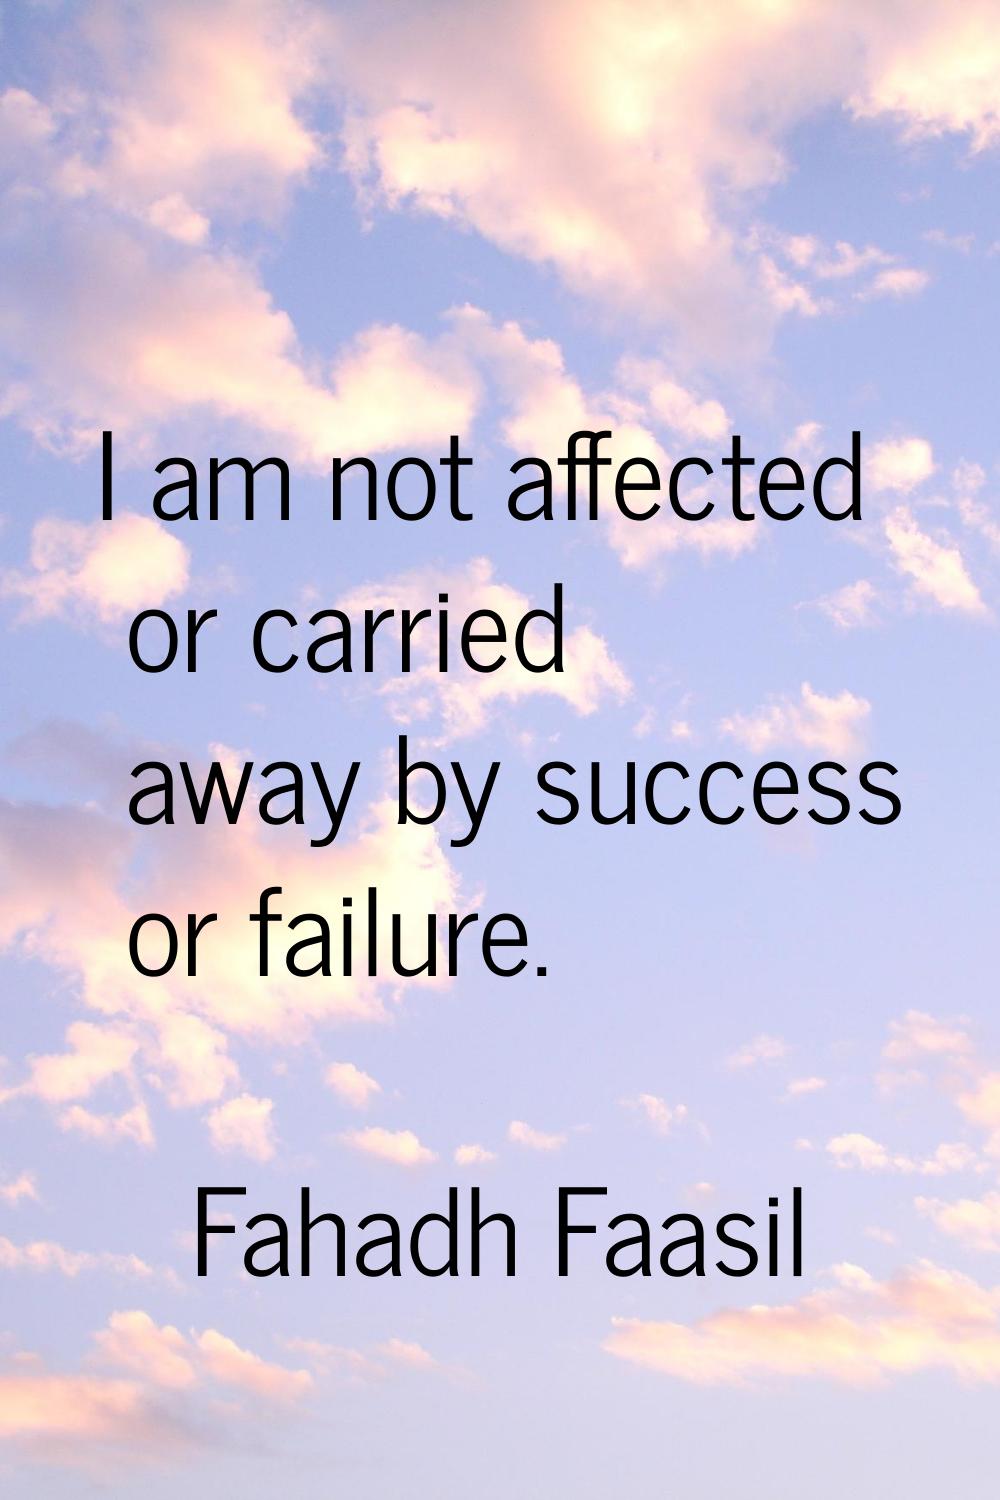 I am not affected or carried away by success or failure.